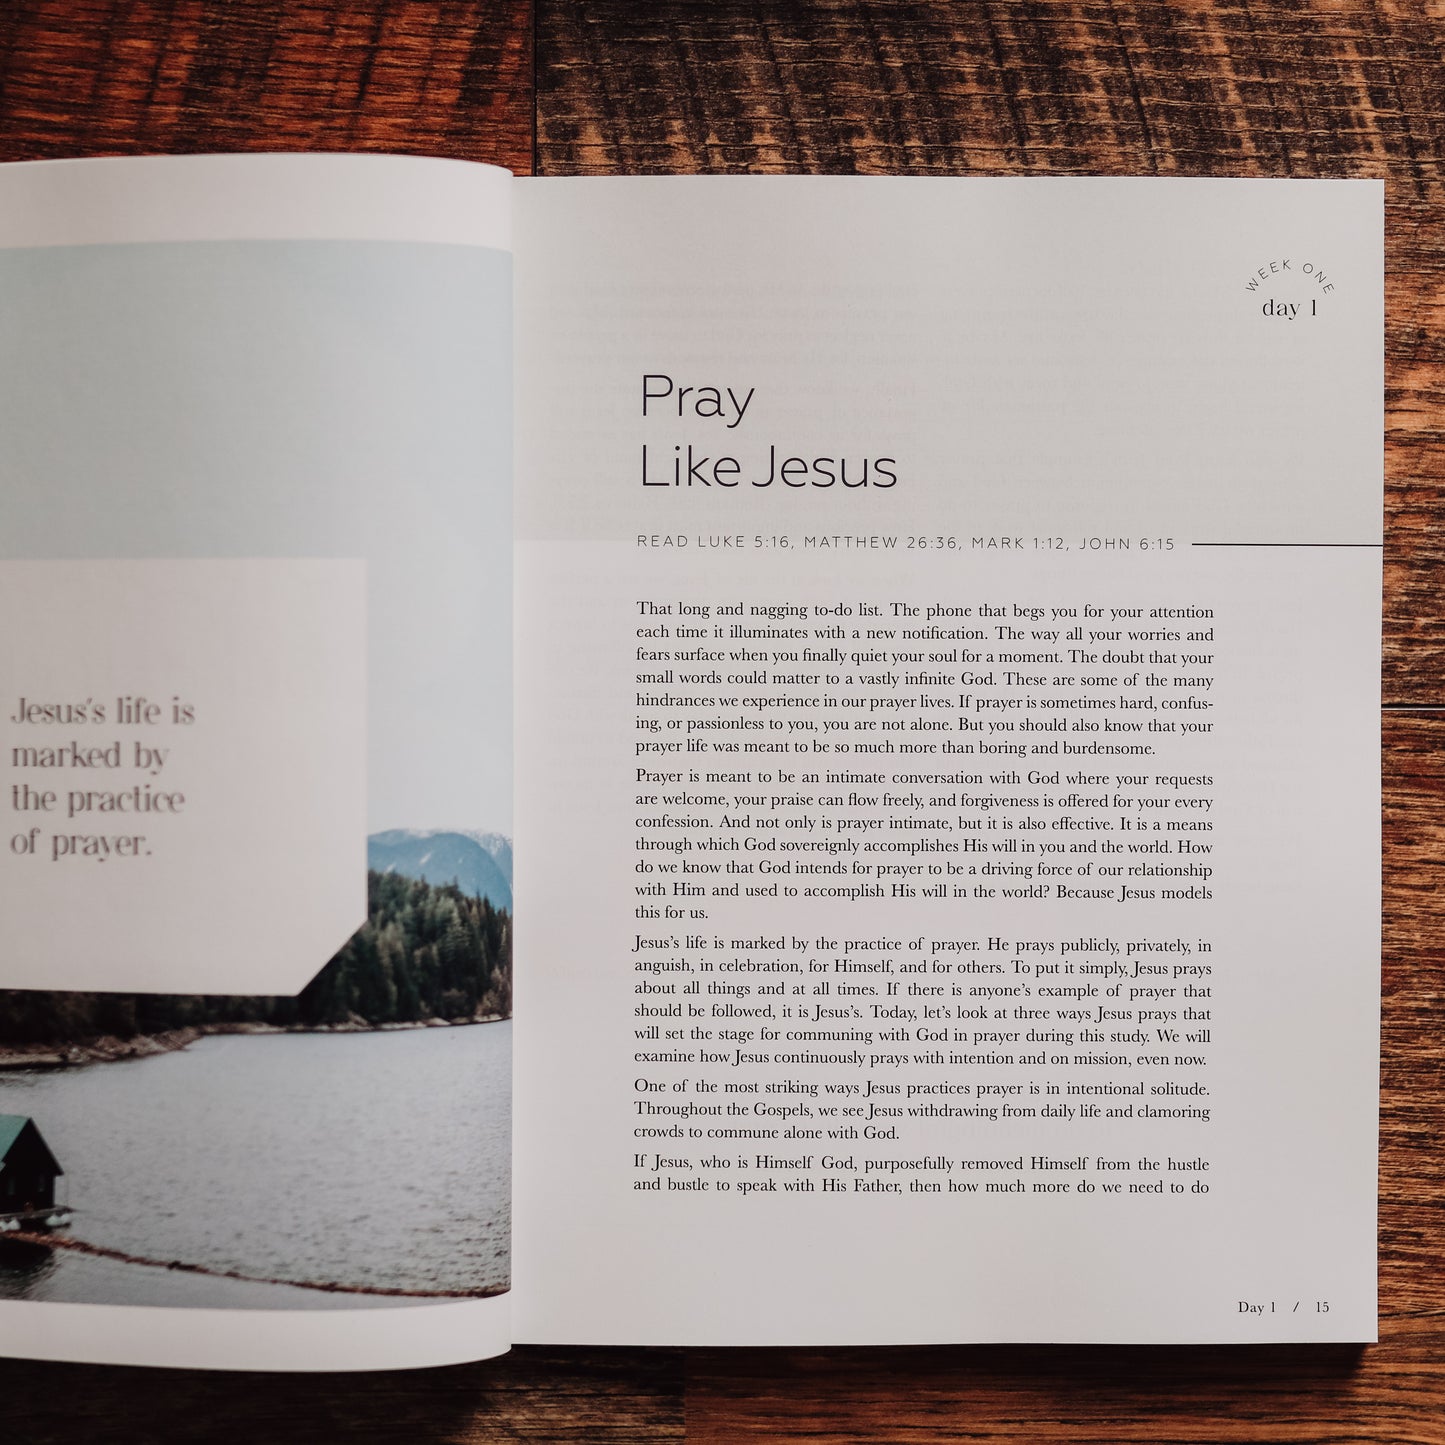 Pray | Cultivating a Passionate Practice of Prayer - Men